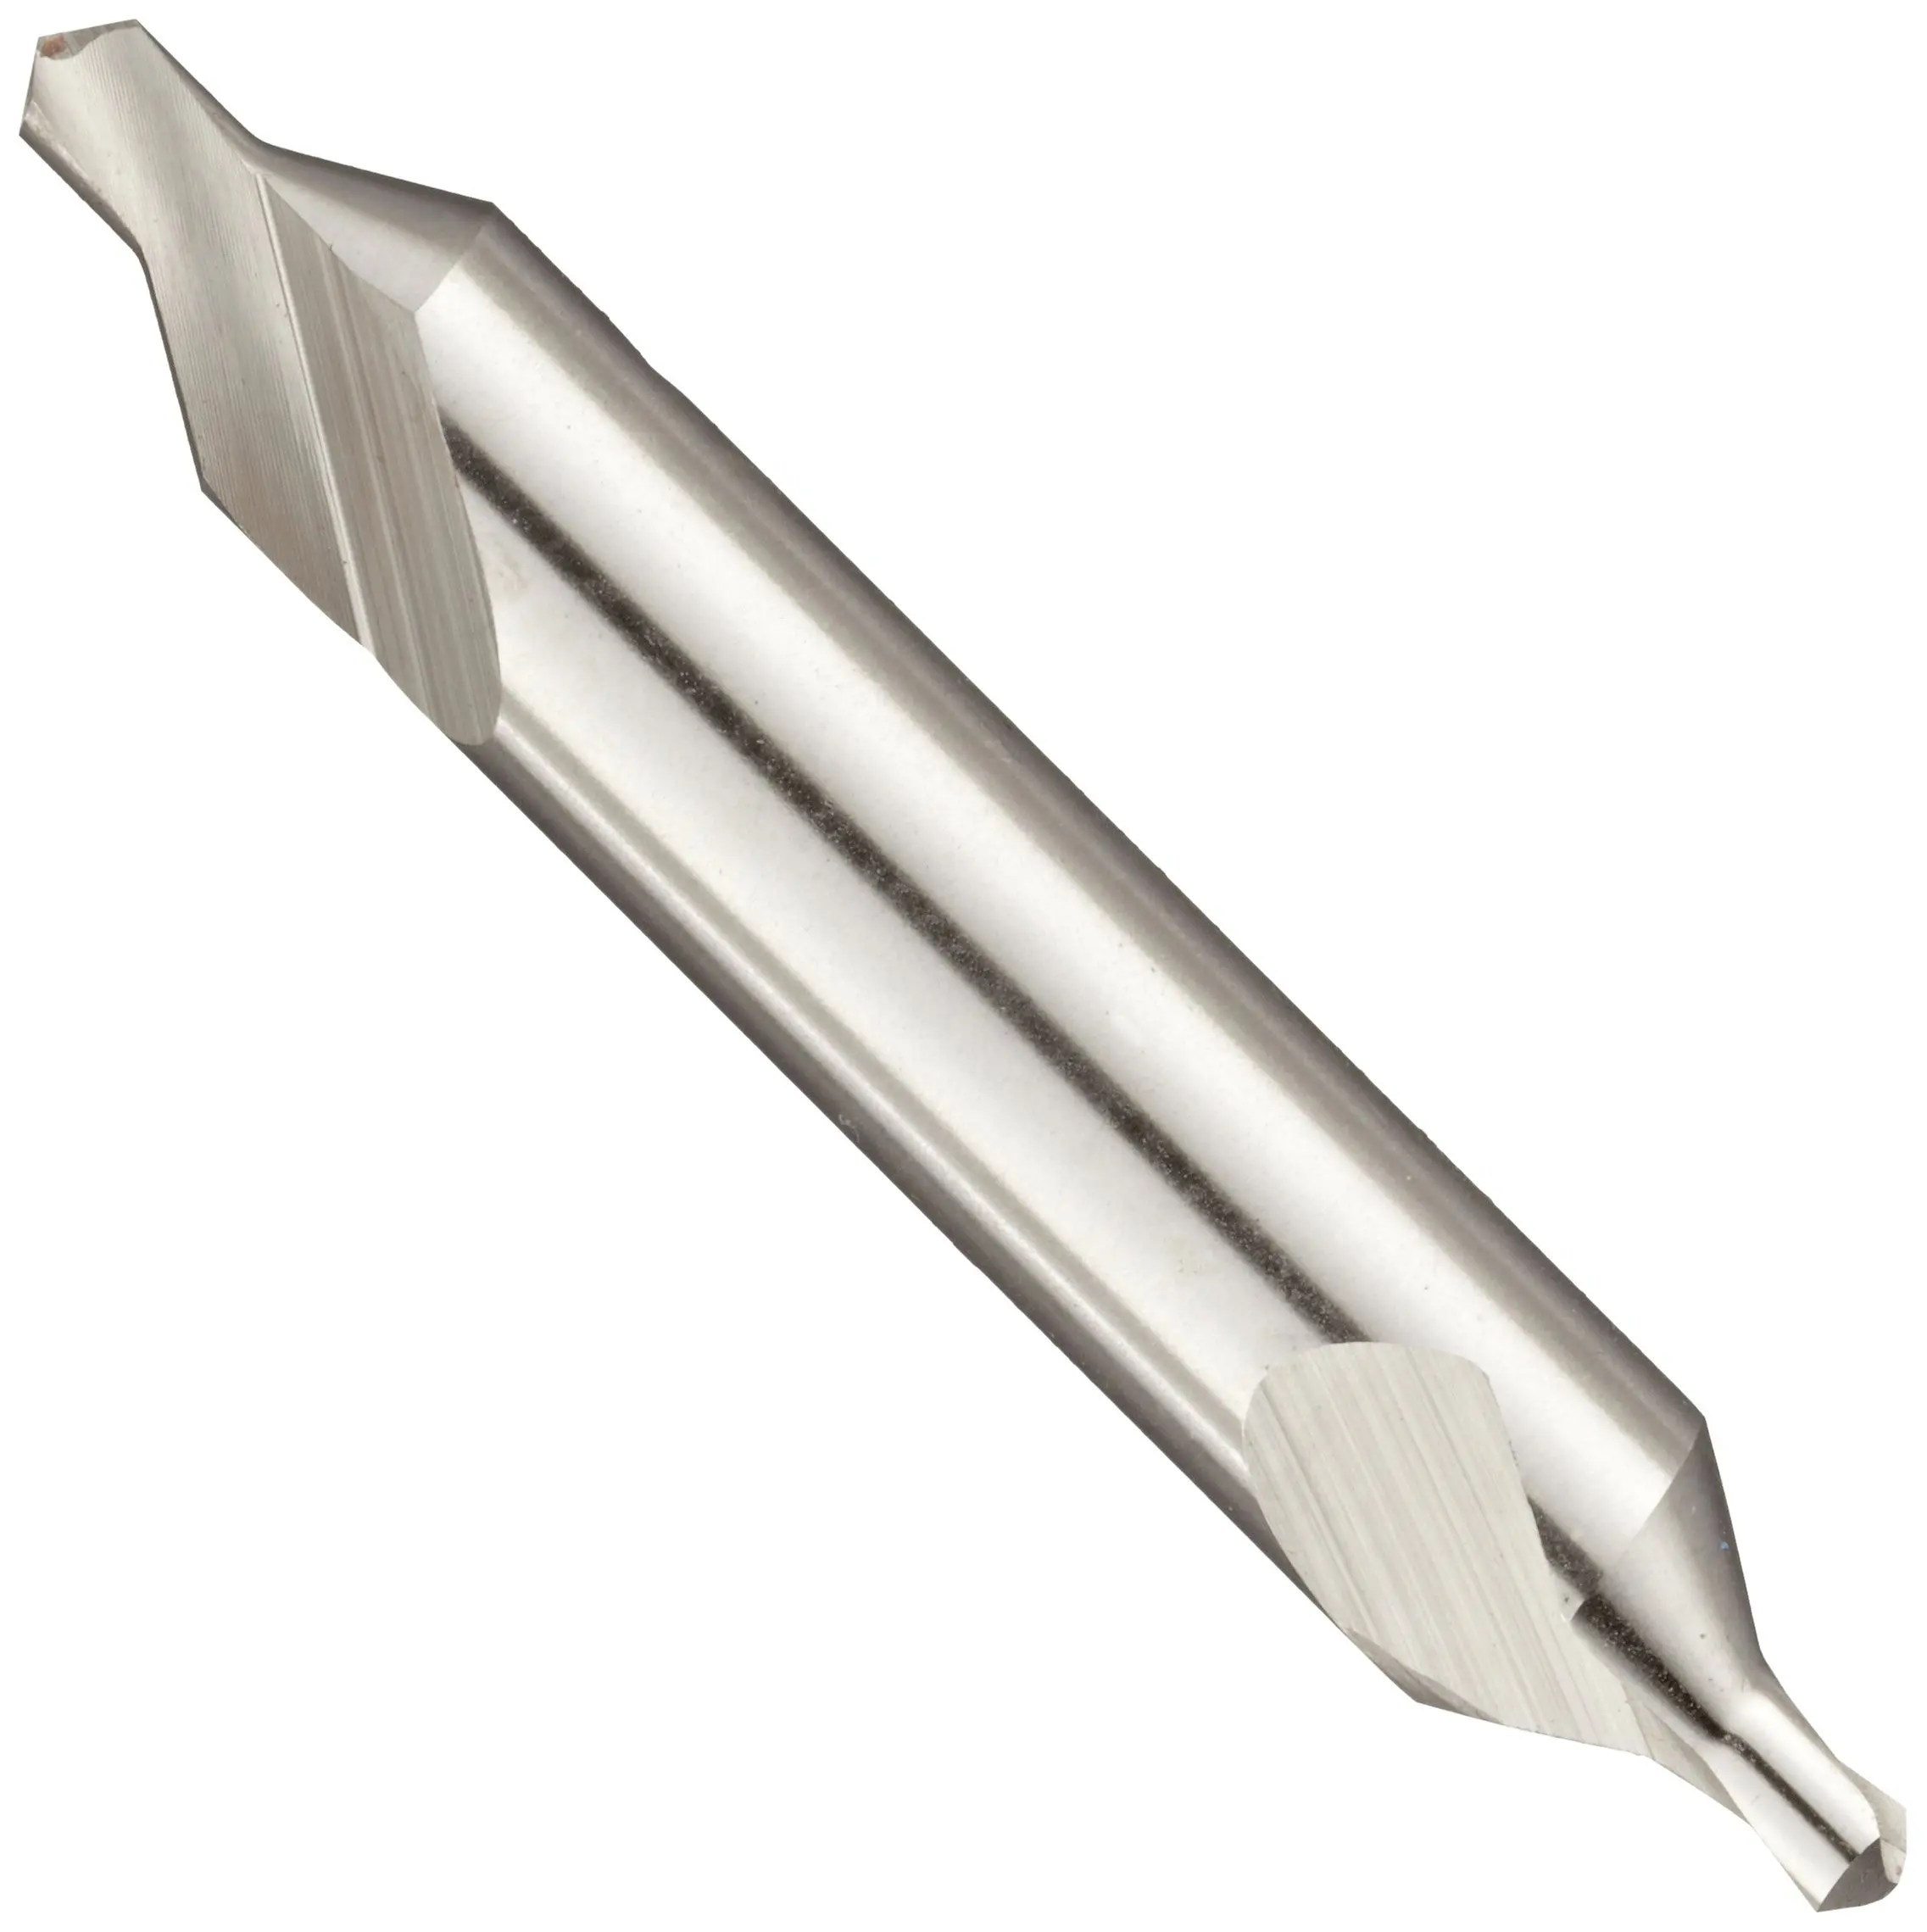 3 Flutes 20.5 mm Body Dia. Uncoated Bright 10 mm Shank Dia Round Shank Dormer G154 Series High-Speed Steel Single-End Countersink Finish 82 Degrees